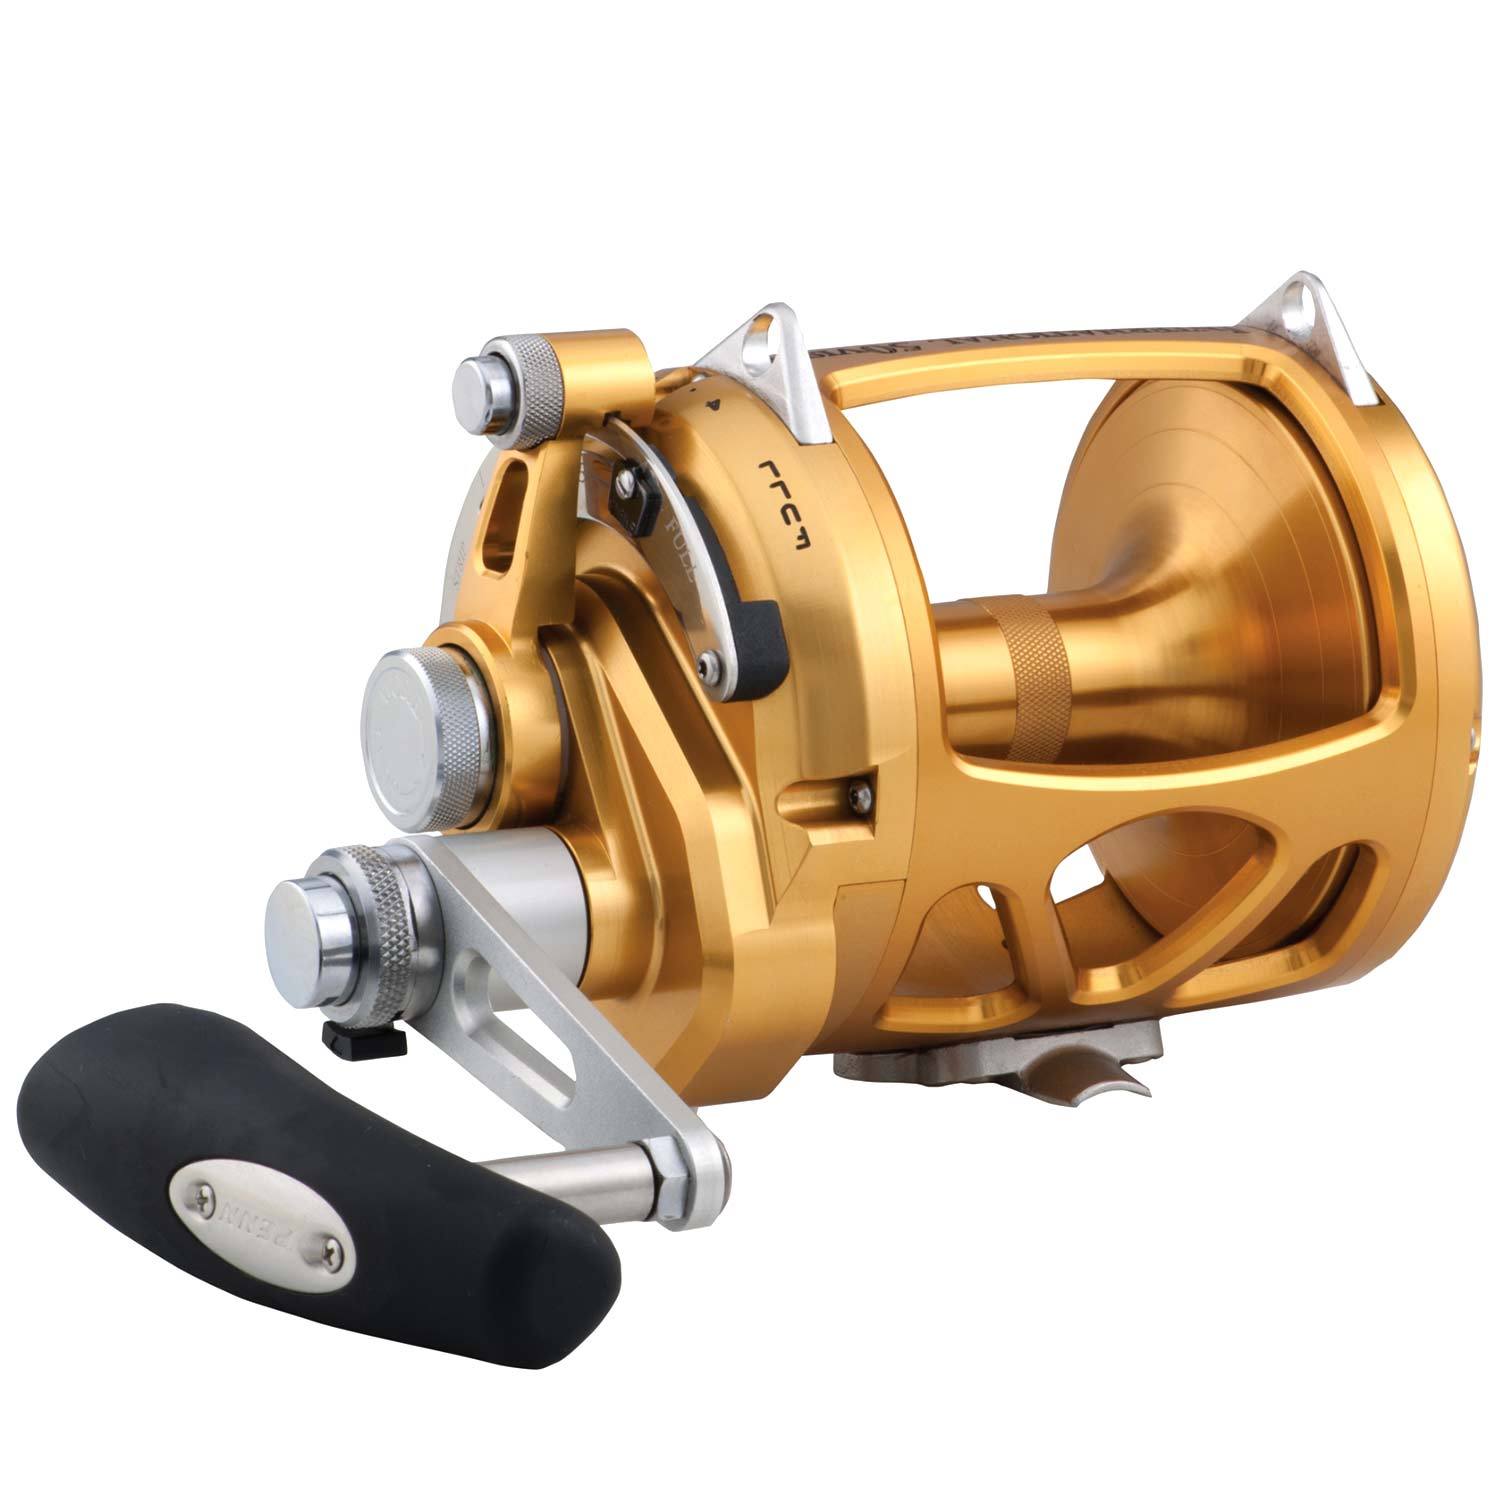 Level Wind Star Drag Round Trolling Reel, Right Hand, Conventional  Baitcasting Fishing Reel with Powerful Handle for Saltwater Big Game